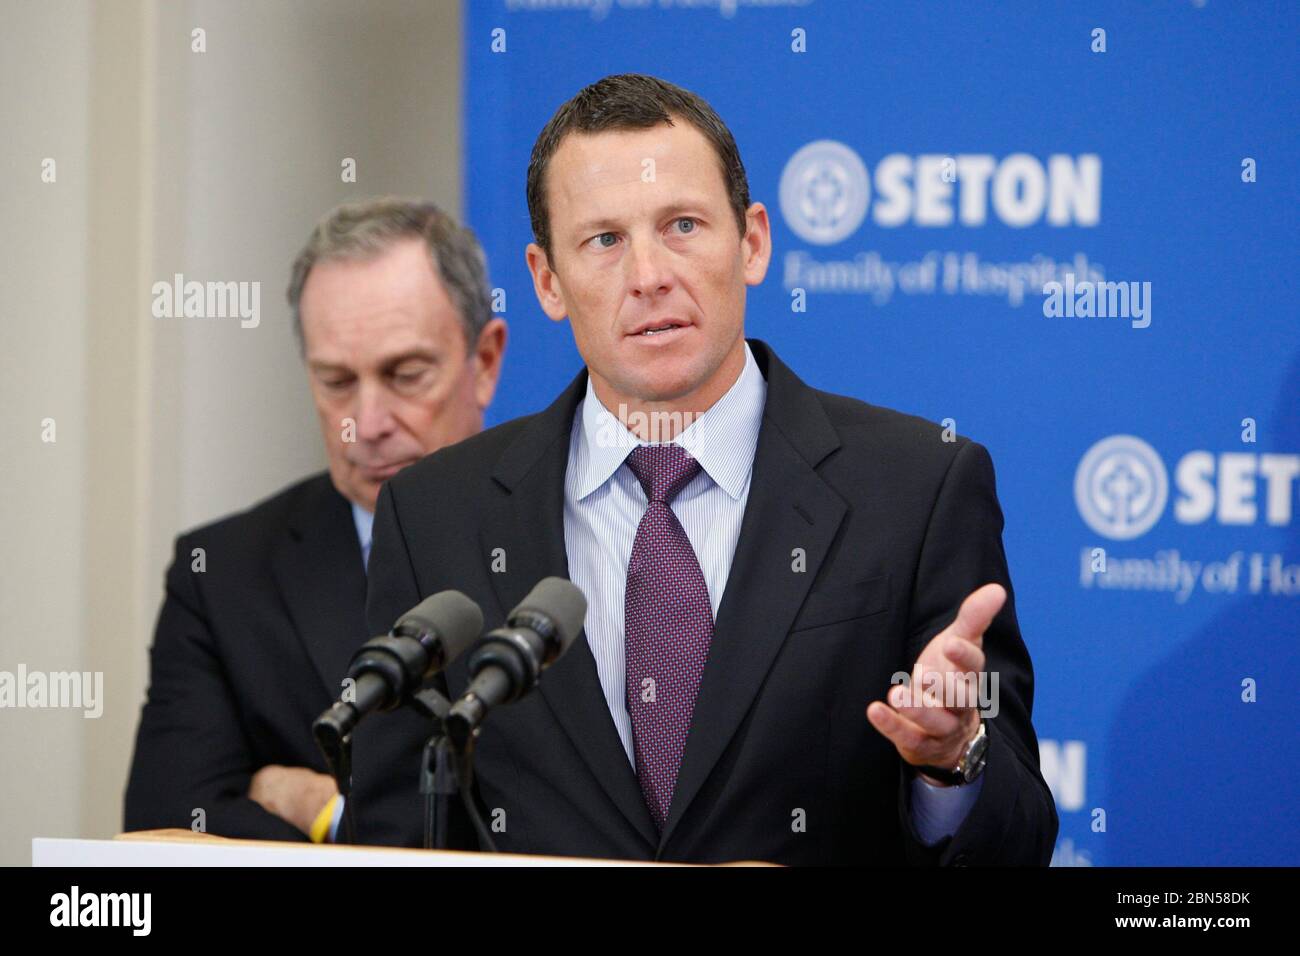 Austin, Texas, USA, January 18, 2008:  Lance Armstrong (r) speaks about a cancer health initiative after  touring a cancer ward at Brackenridge Hospital in Austin with New York City Mayor Michael Bloomberg (l).  ©Bob Daemmrich Stock Photo